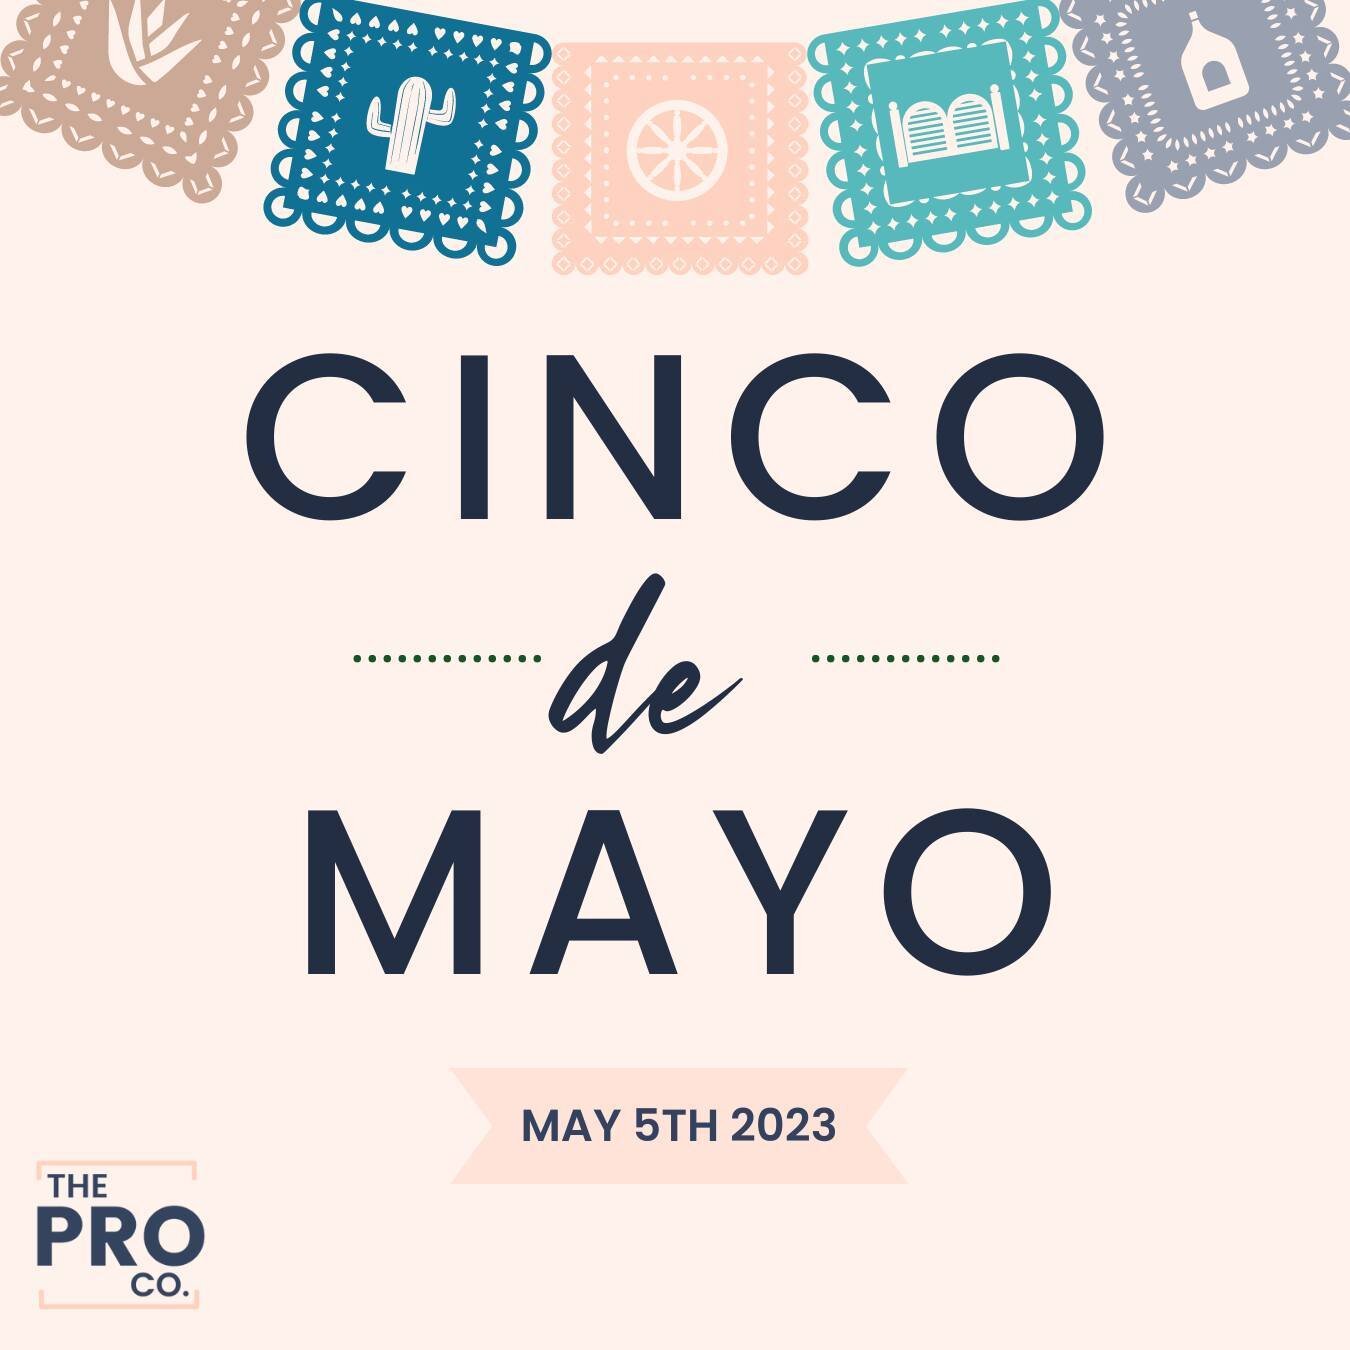 It's May 5th, and you know what that means... It's Cinco De Mayo! 🥳 How will you be celebrating today?

Schedule a free 30-minute consultation and discover how a virtual assistant can transform your business! The Productive Co.&mdash;Transform your 